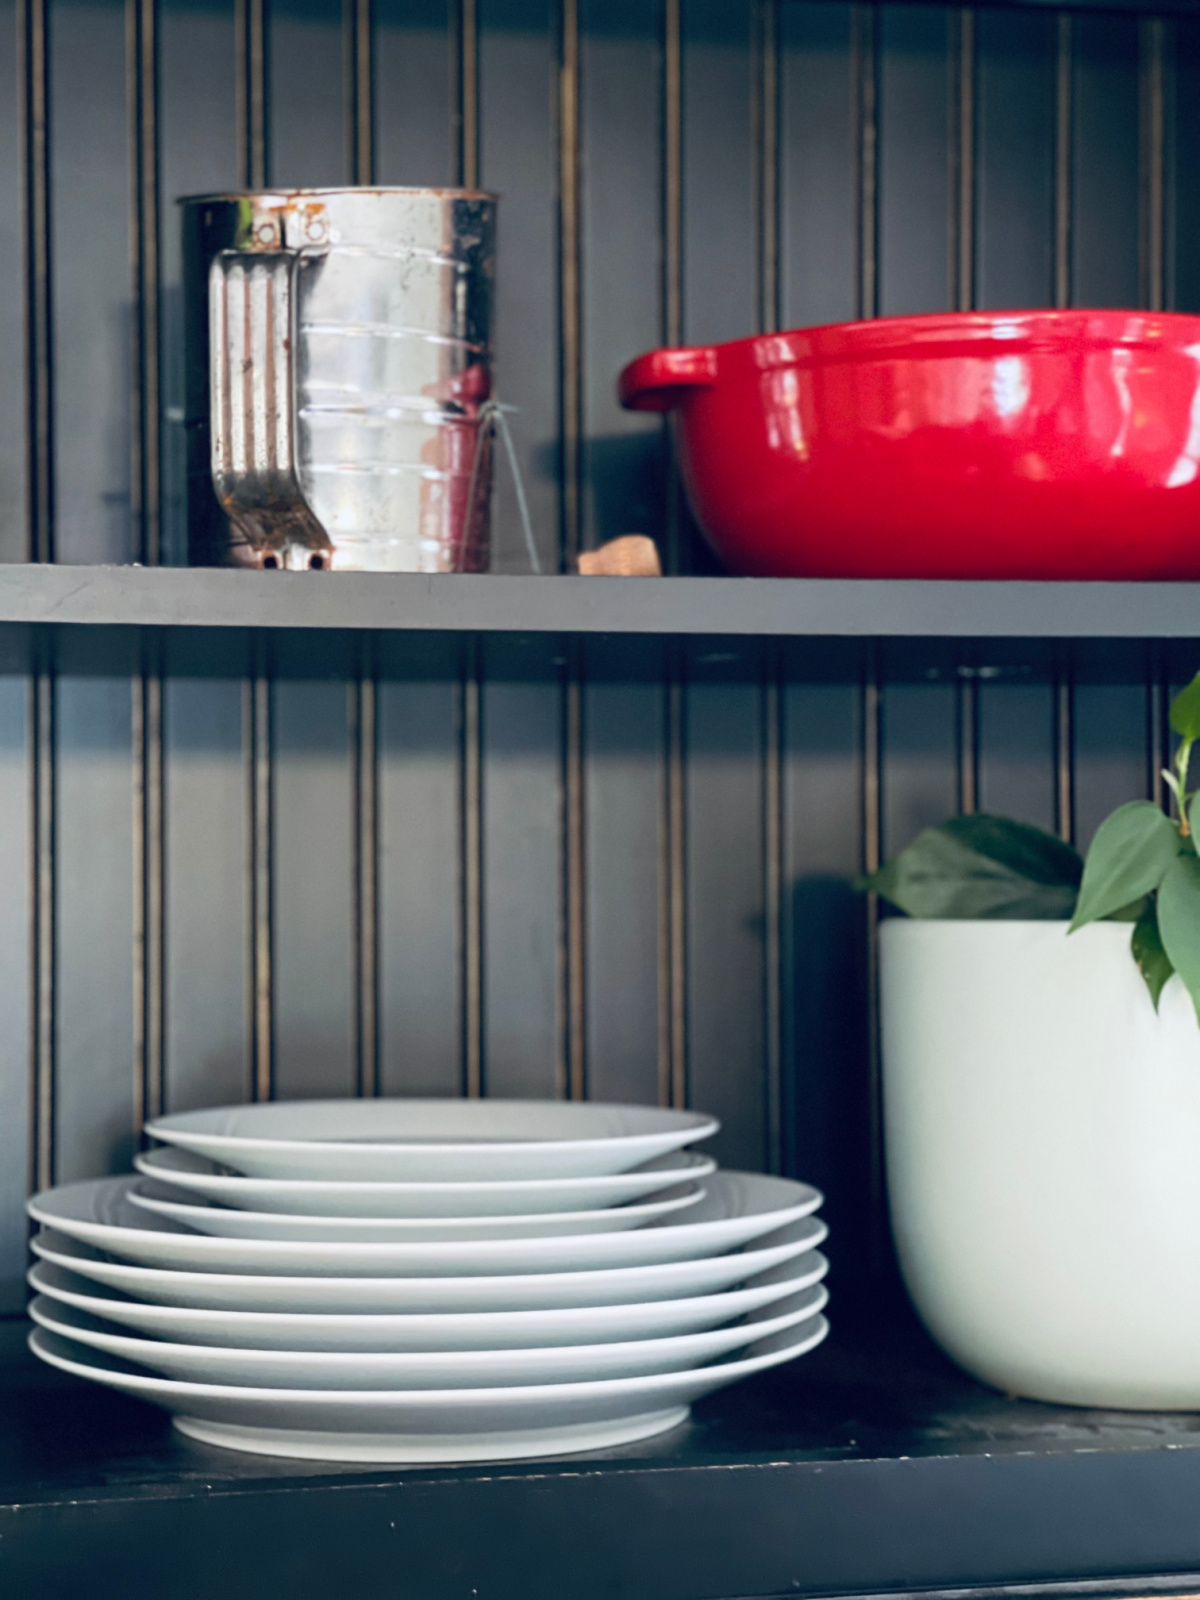 dinner plates stacked on shelf with plant, sifter and red decorate bowl